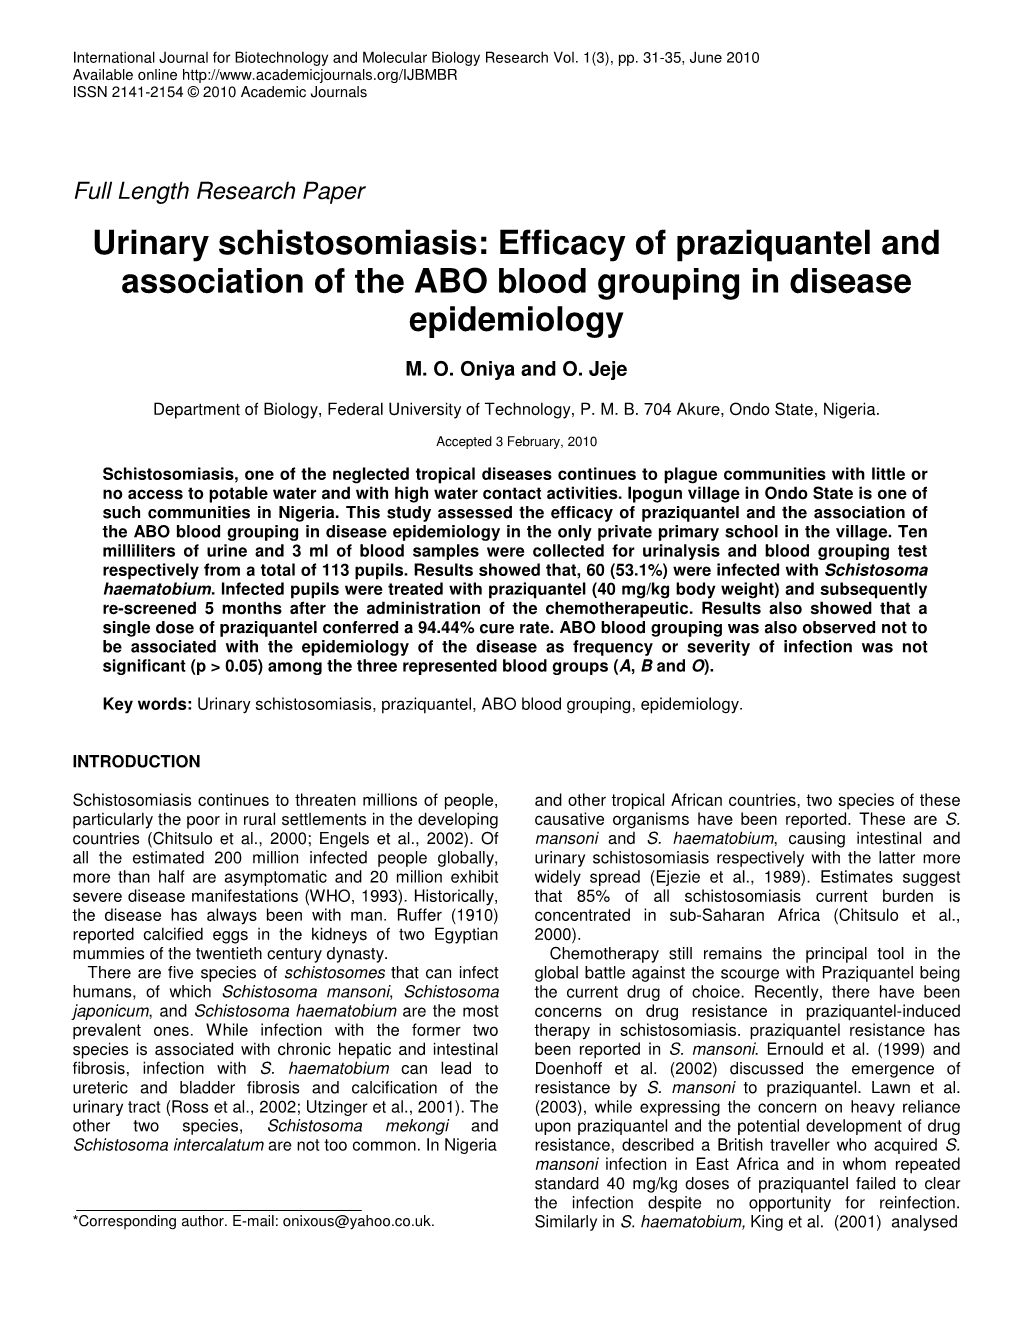 Urinary Schistosomiasis: Efficacy of Praziquantel and Association of the ABO Blood Grouping in Disease Epidemiology